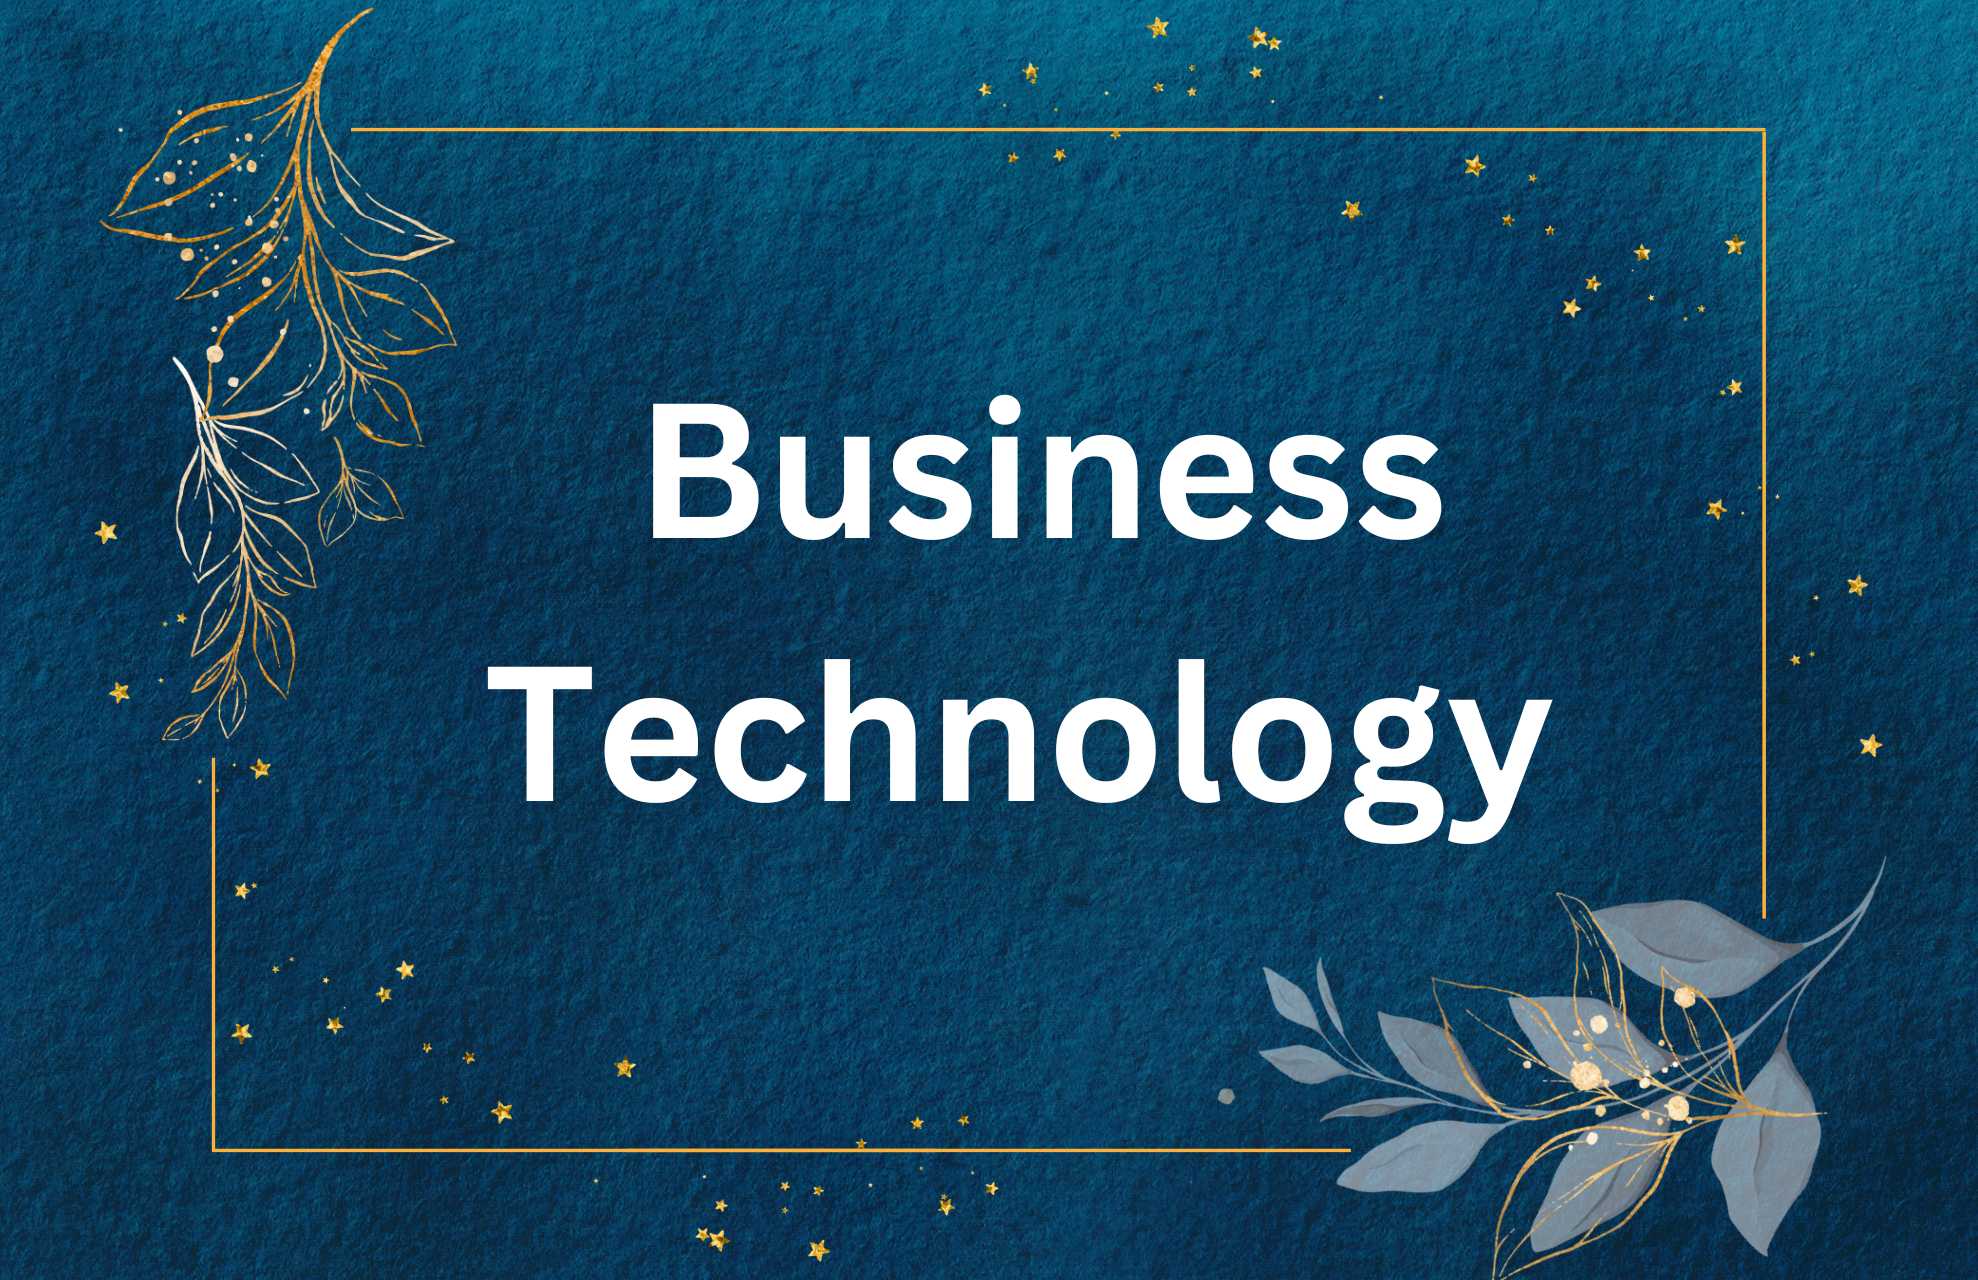 Scope of Business Technology with their types